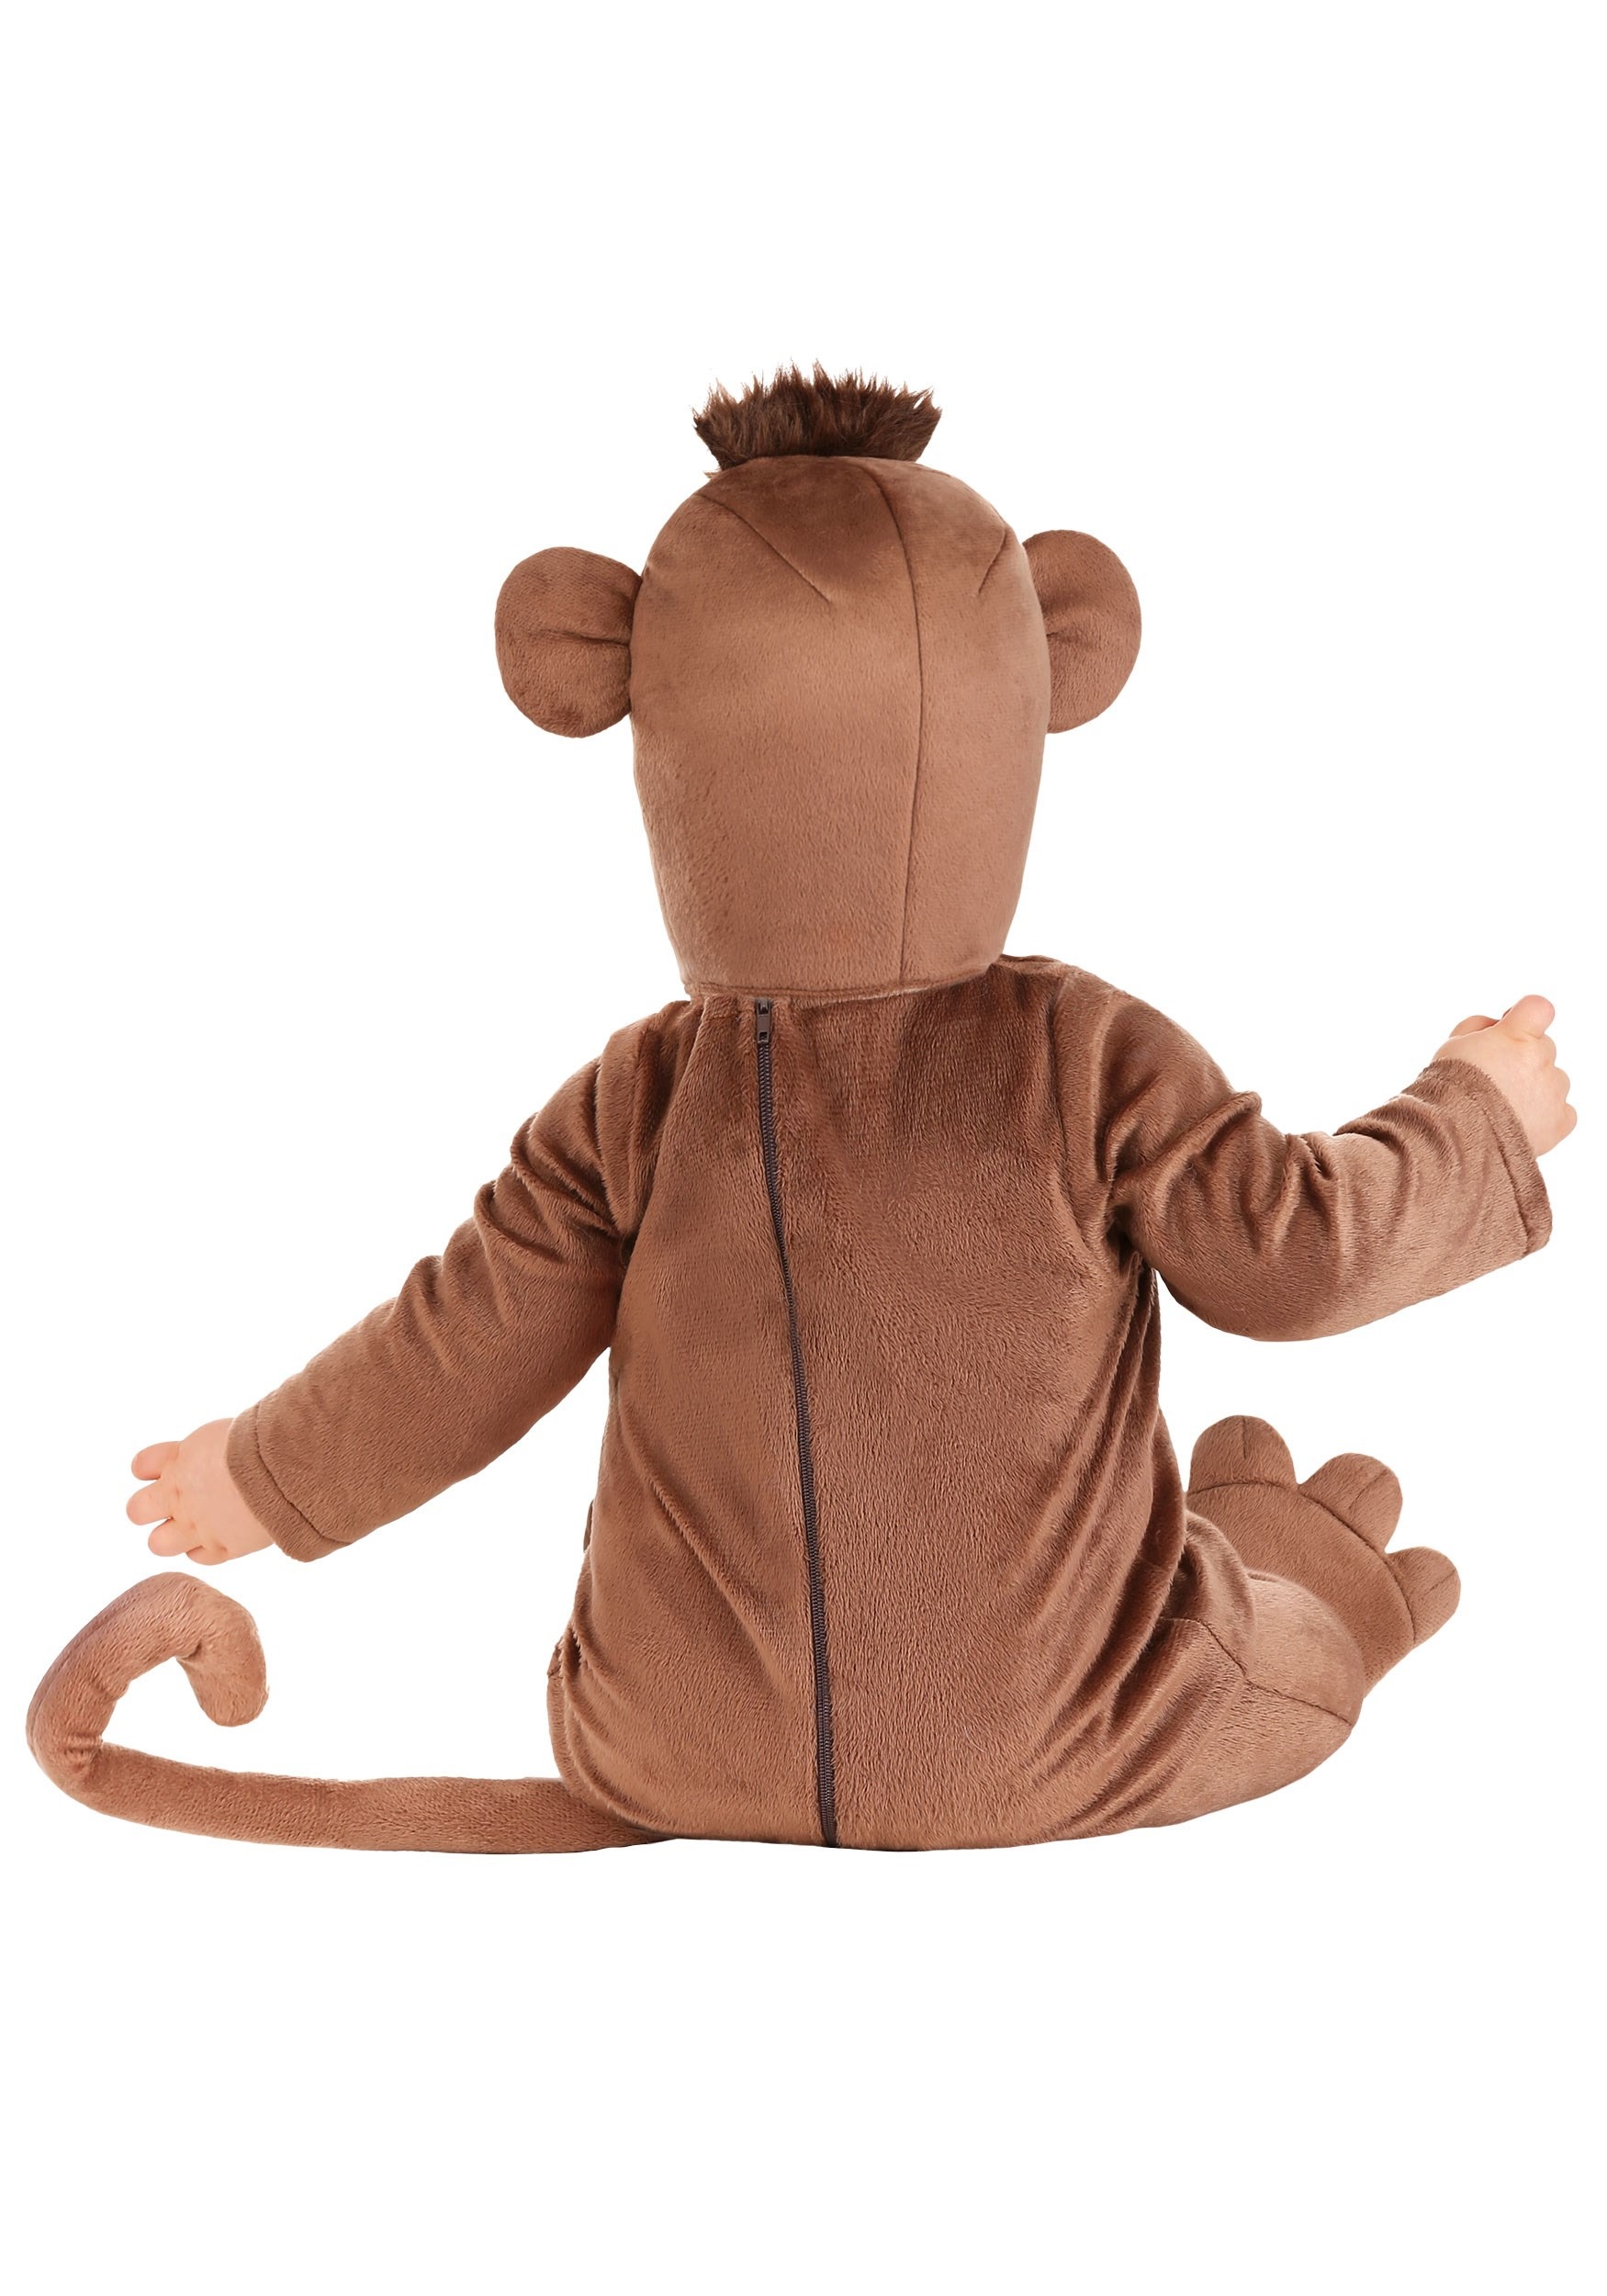 Monkey Costume For Babies